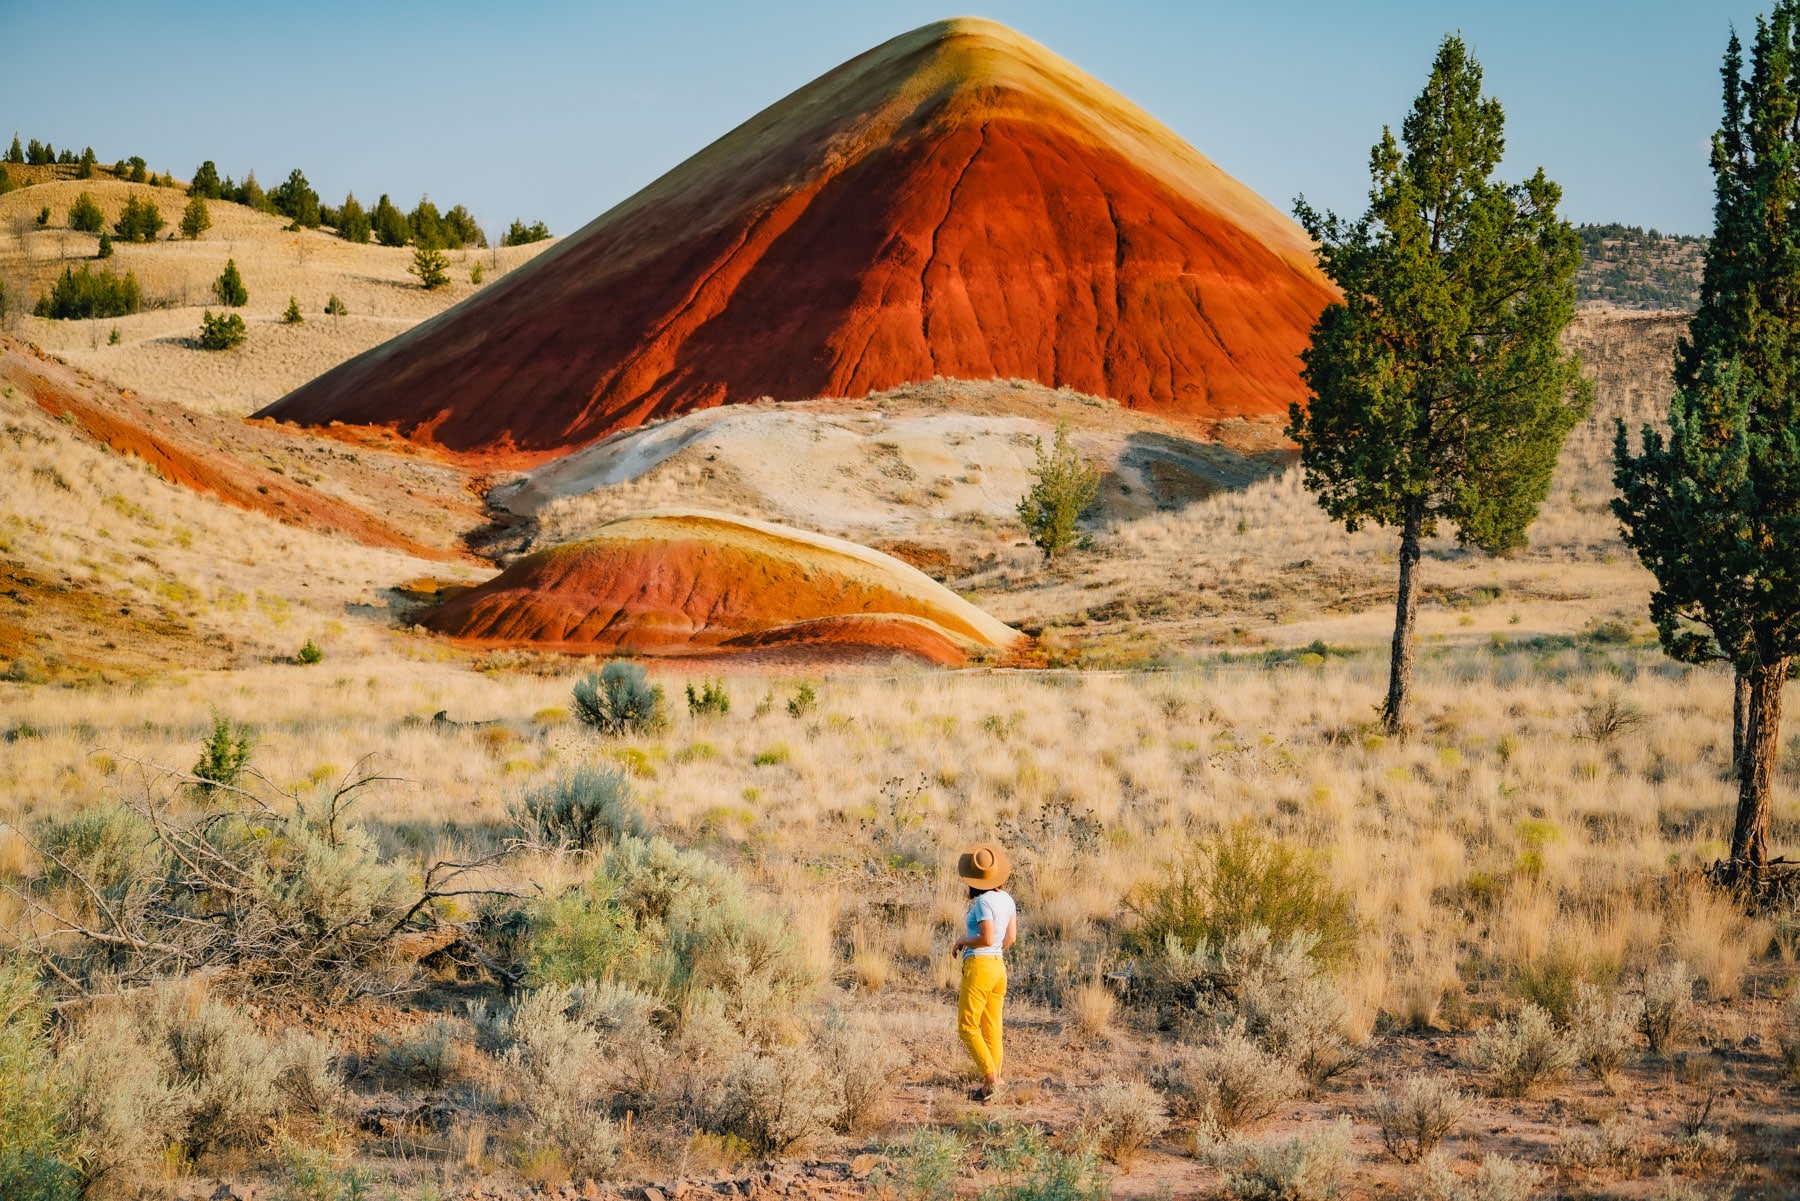 painted hills john day fossil beds | historic sites in oregon